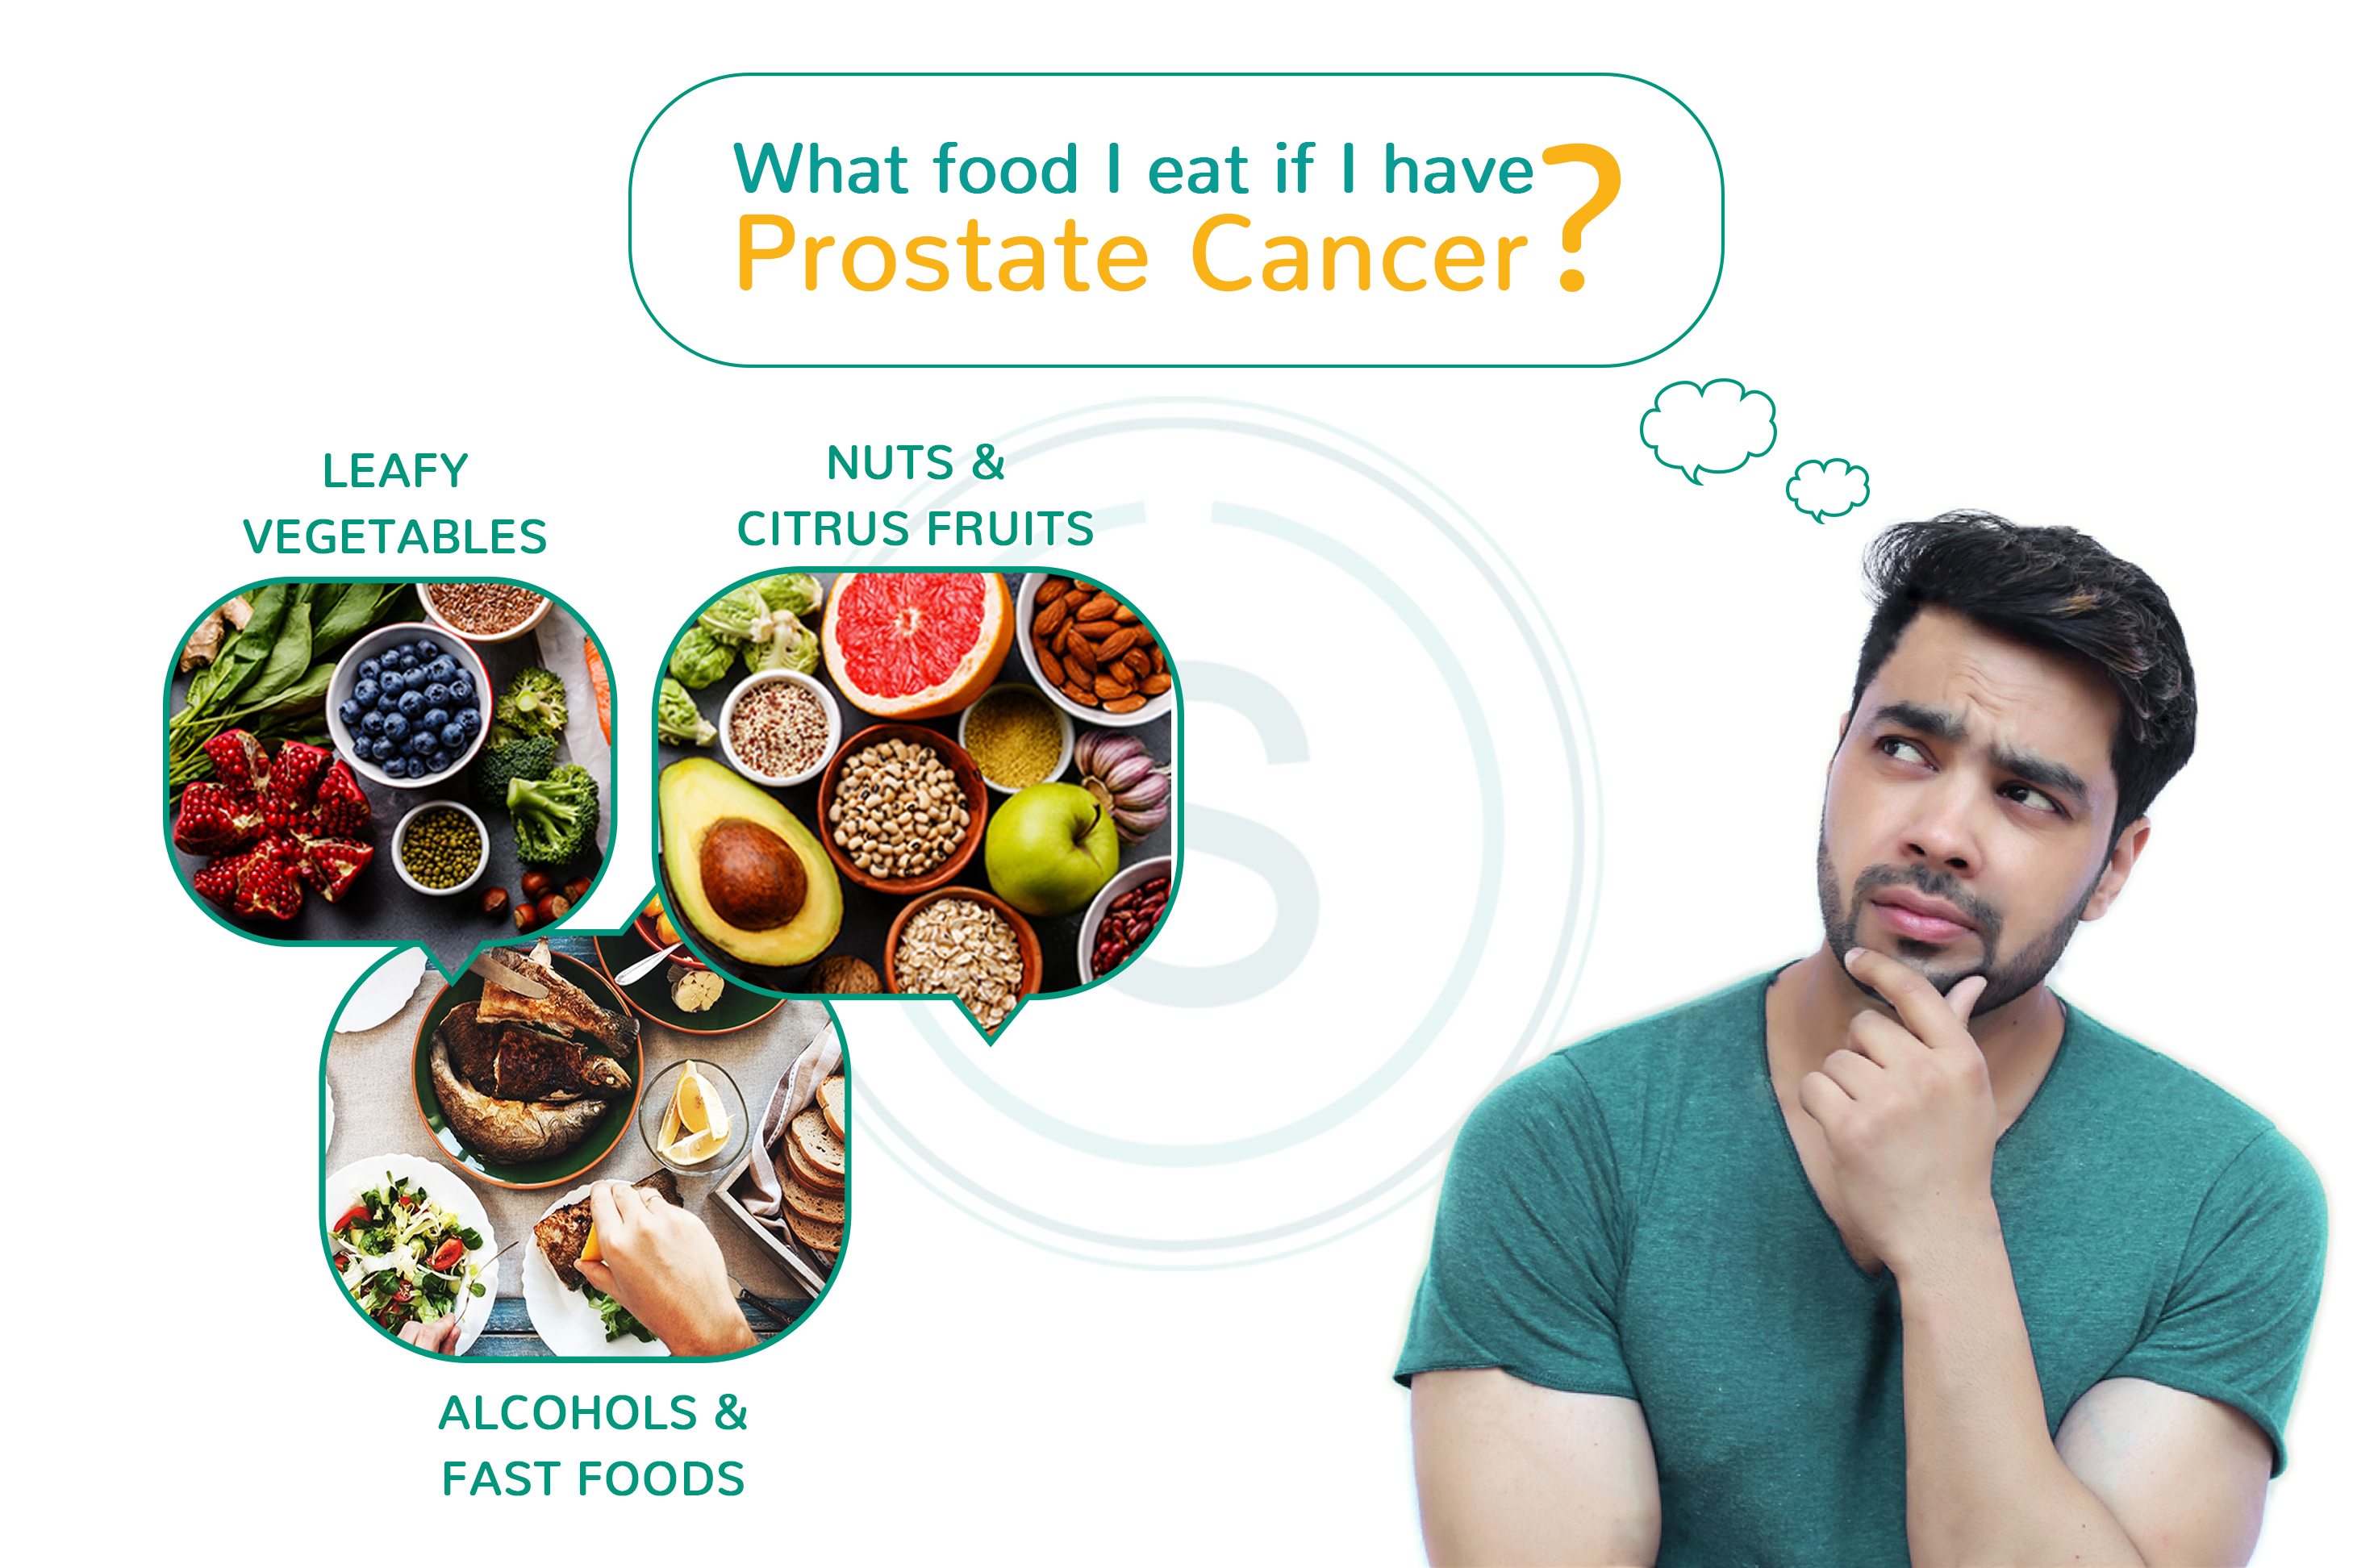 Foods to eat to prevent Prostate Cancer